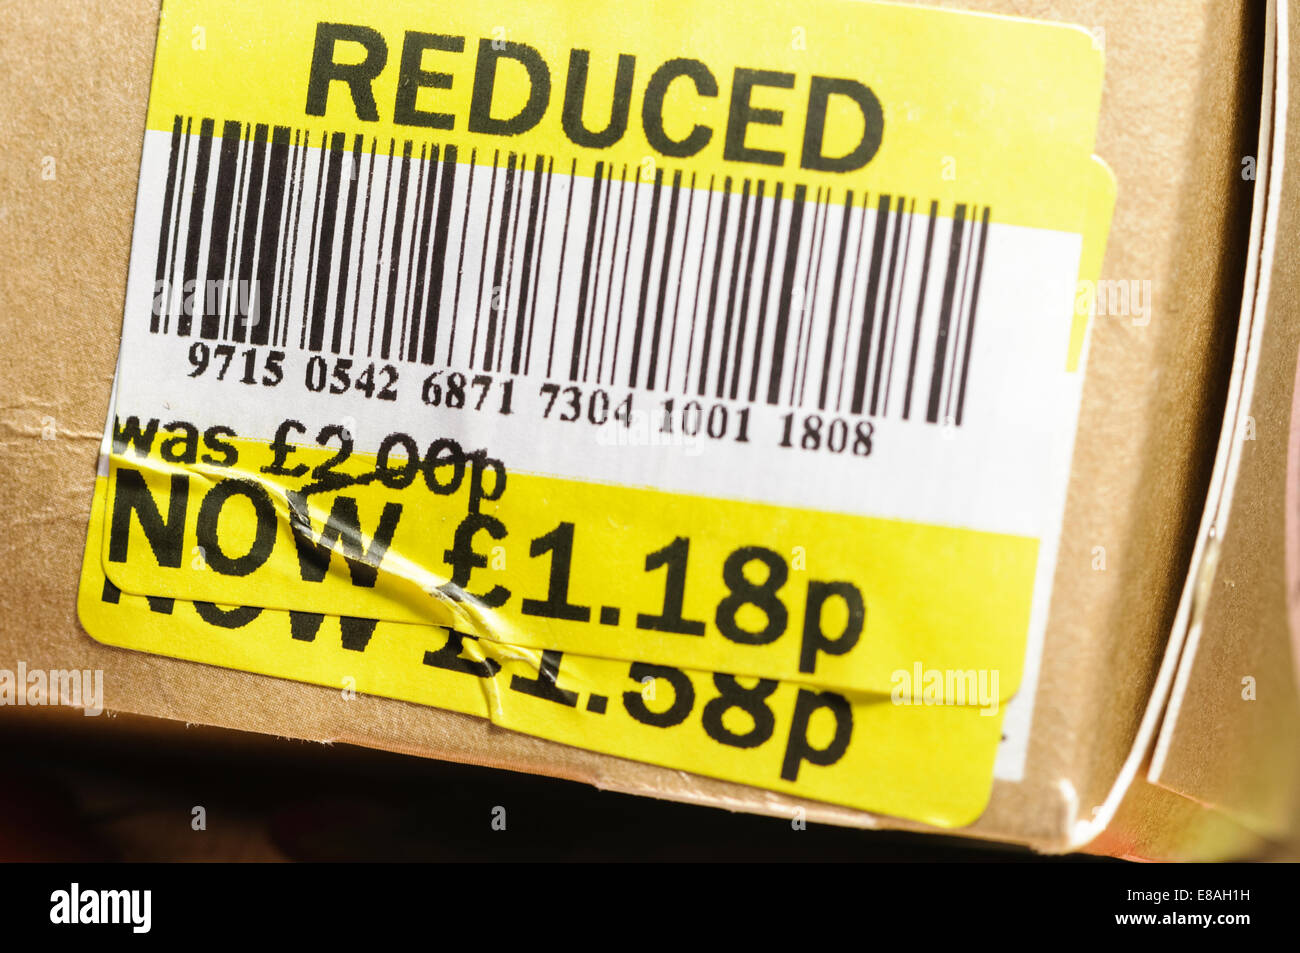 Reduced price label from Tesco Stock Photo